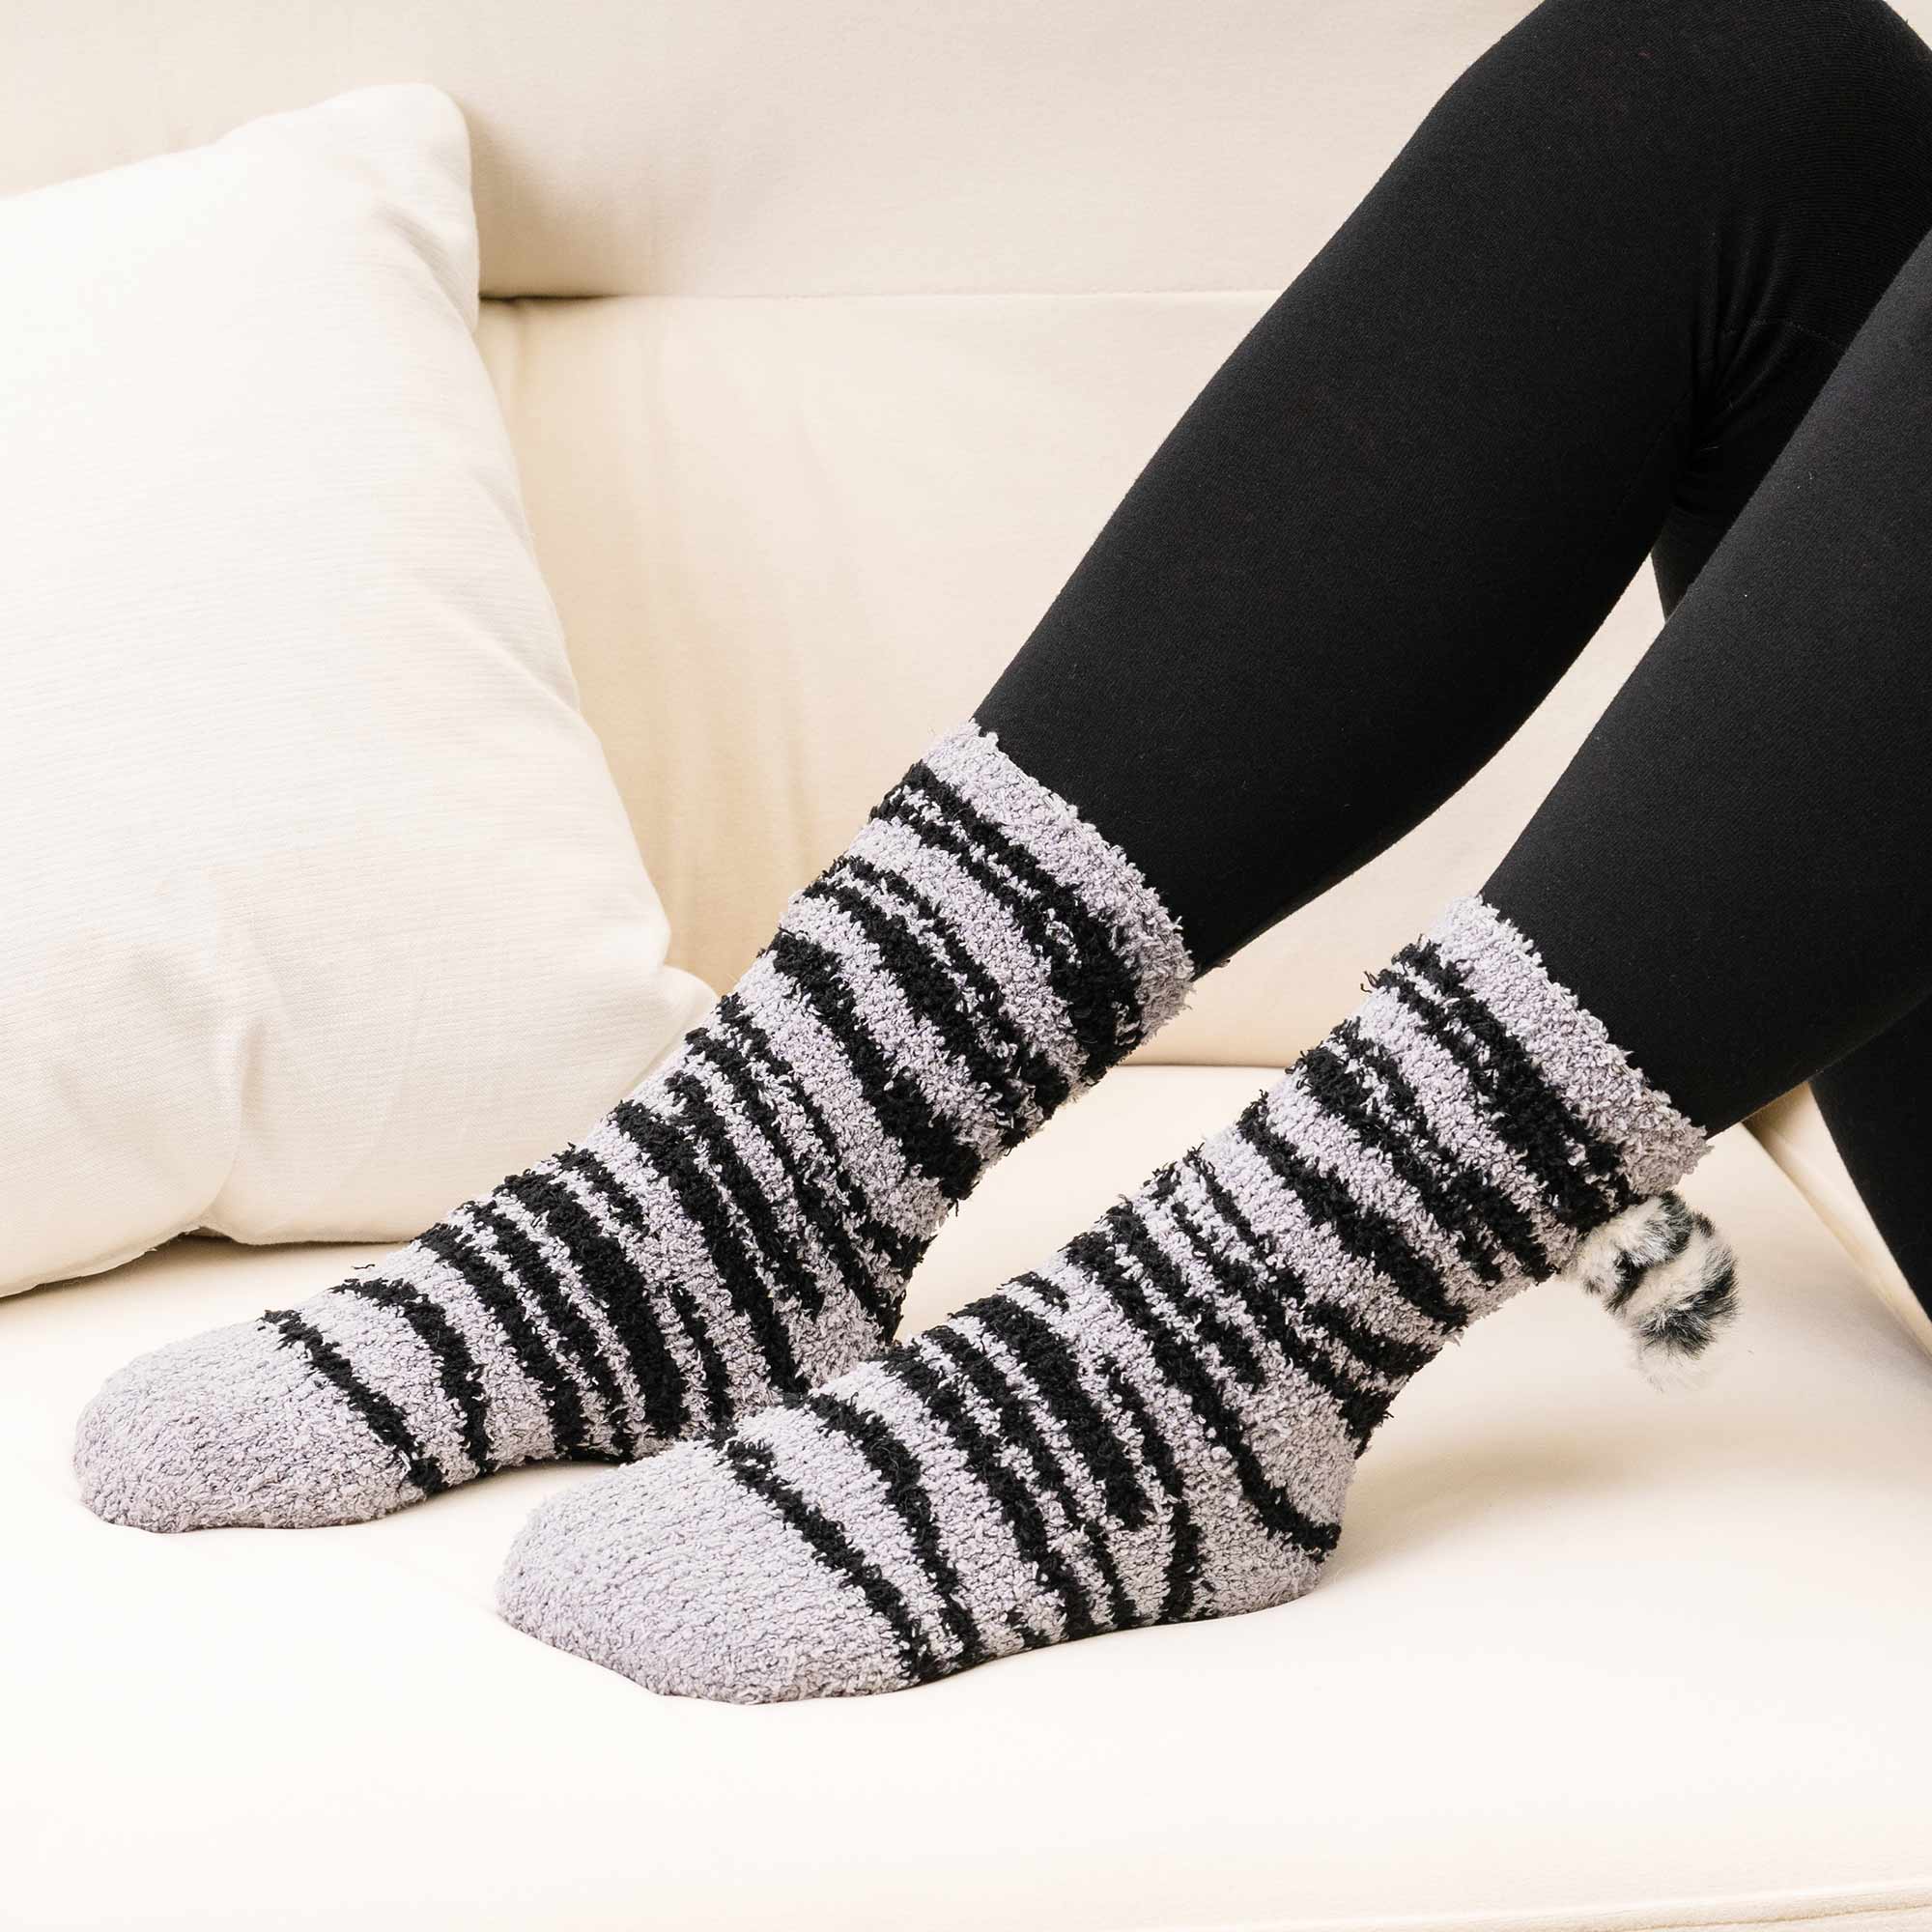 Image of Warm n' Fuzzy Kitty Tail Socks- Black Stripes ... look for the cute kitty tail ! &#x2764;&#xfe0f;